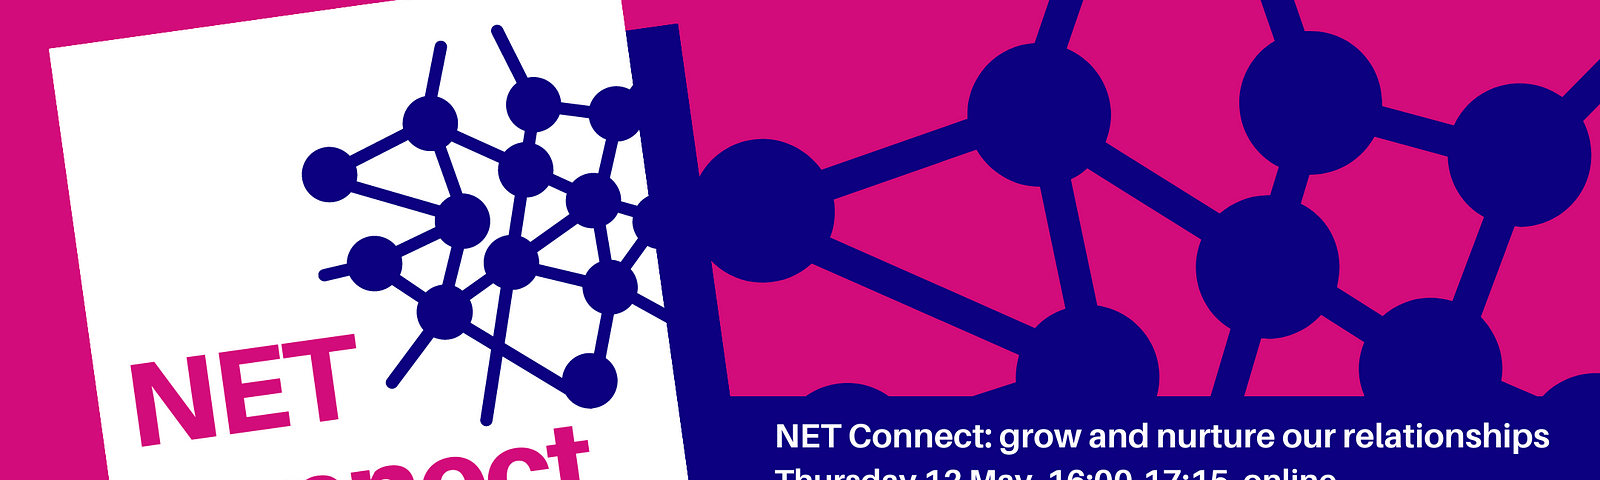 NET Connect event image: design with a cerise pink background, dark blue image of nodes and connections representing a network, with text NET Connect A North East Together event in a square logo. Additional text: Thursday 12 May, 16:00–17:15, online, Eventbrite booking link, @socialleadersne #socialleadersNE